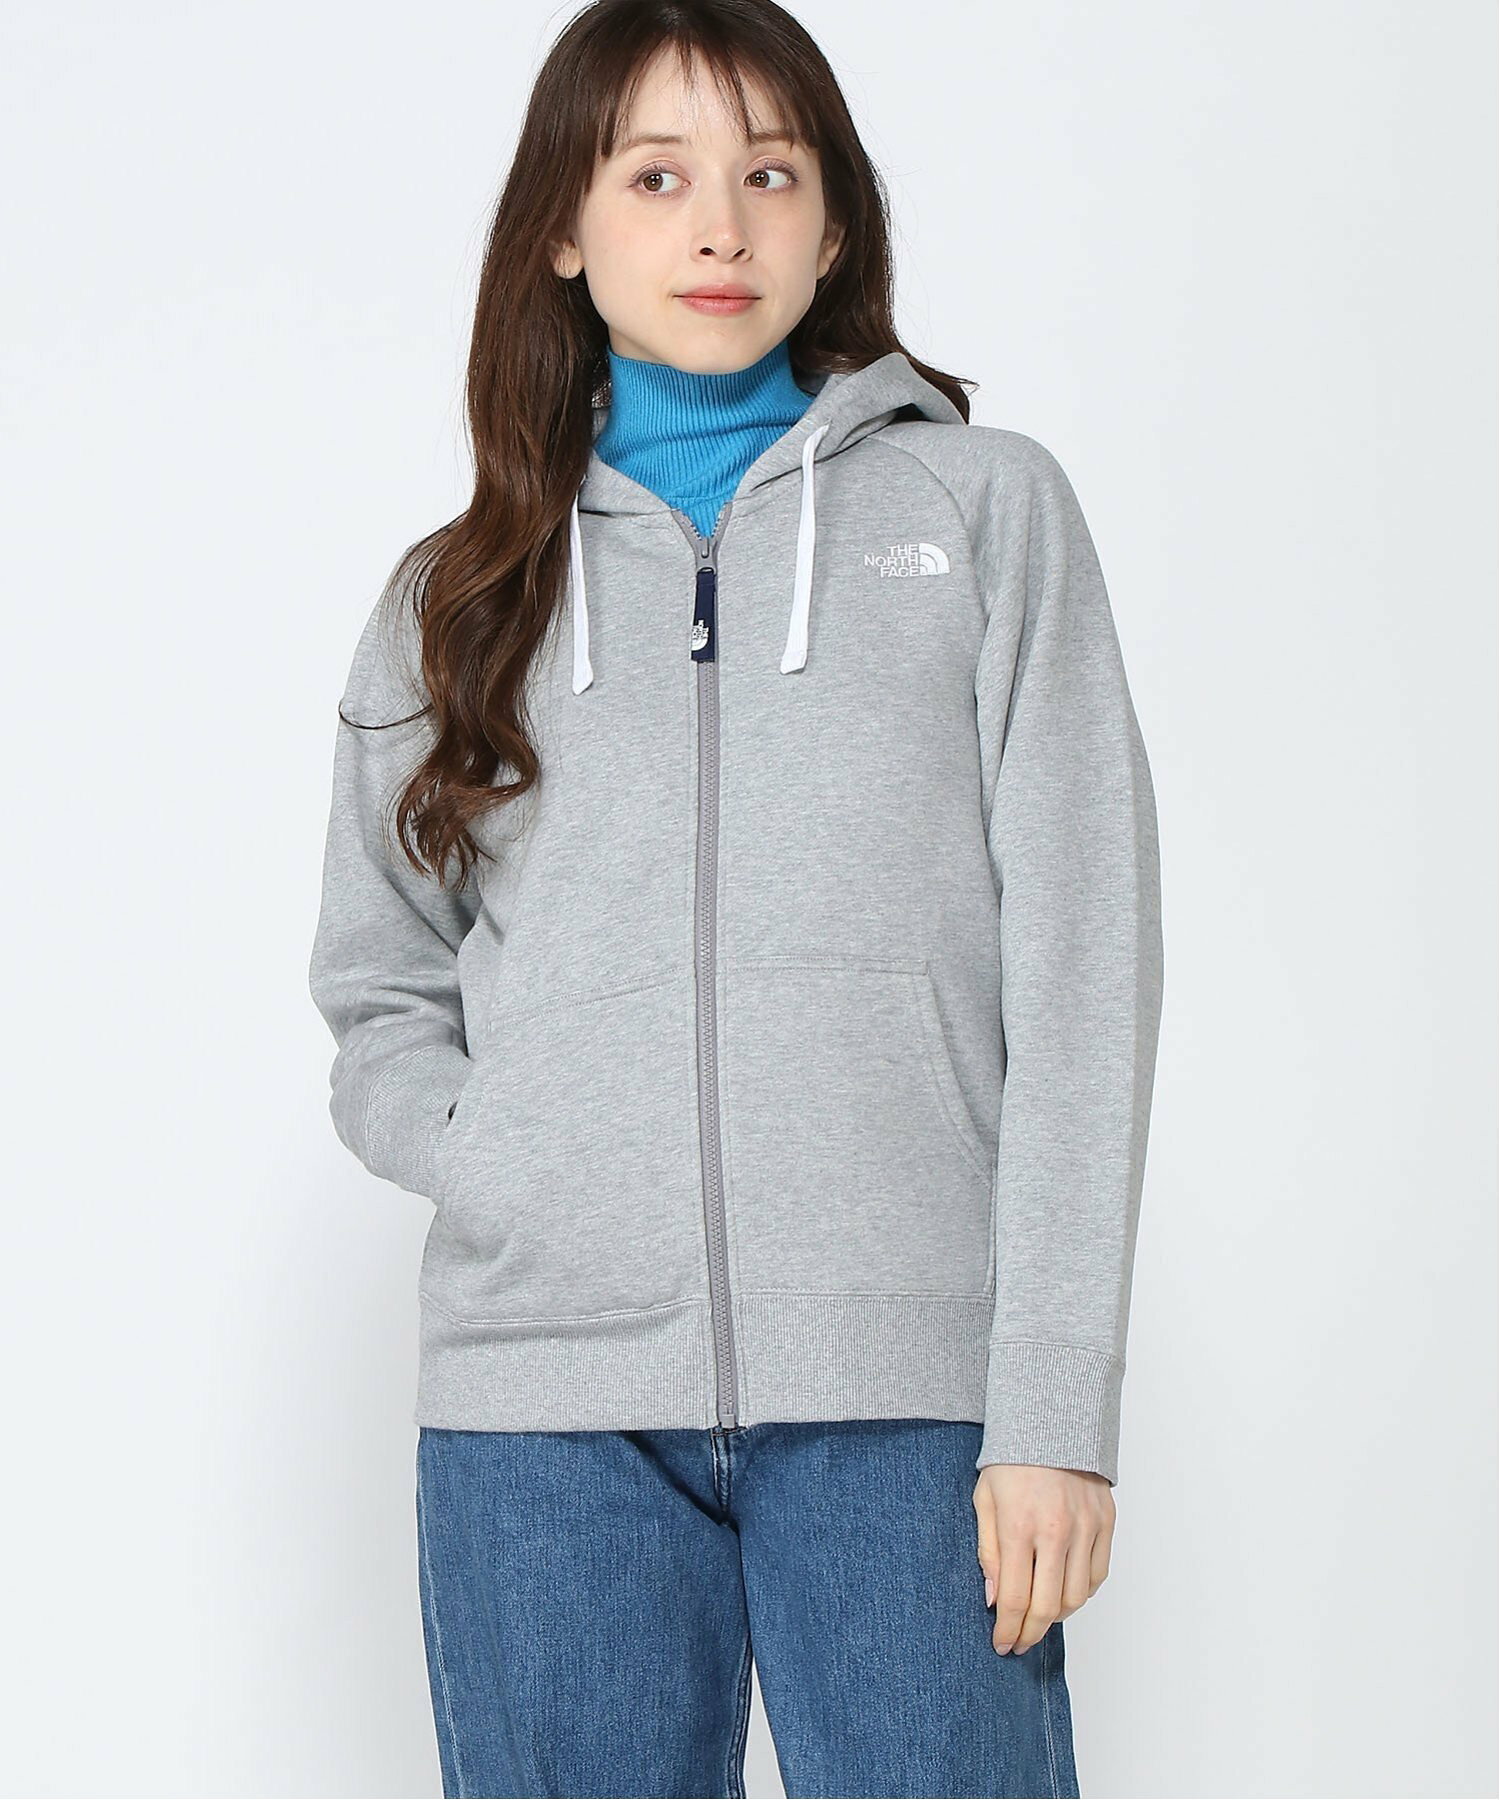 THE NORTH FACE/(W)Rearview Zip Hoodie